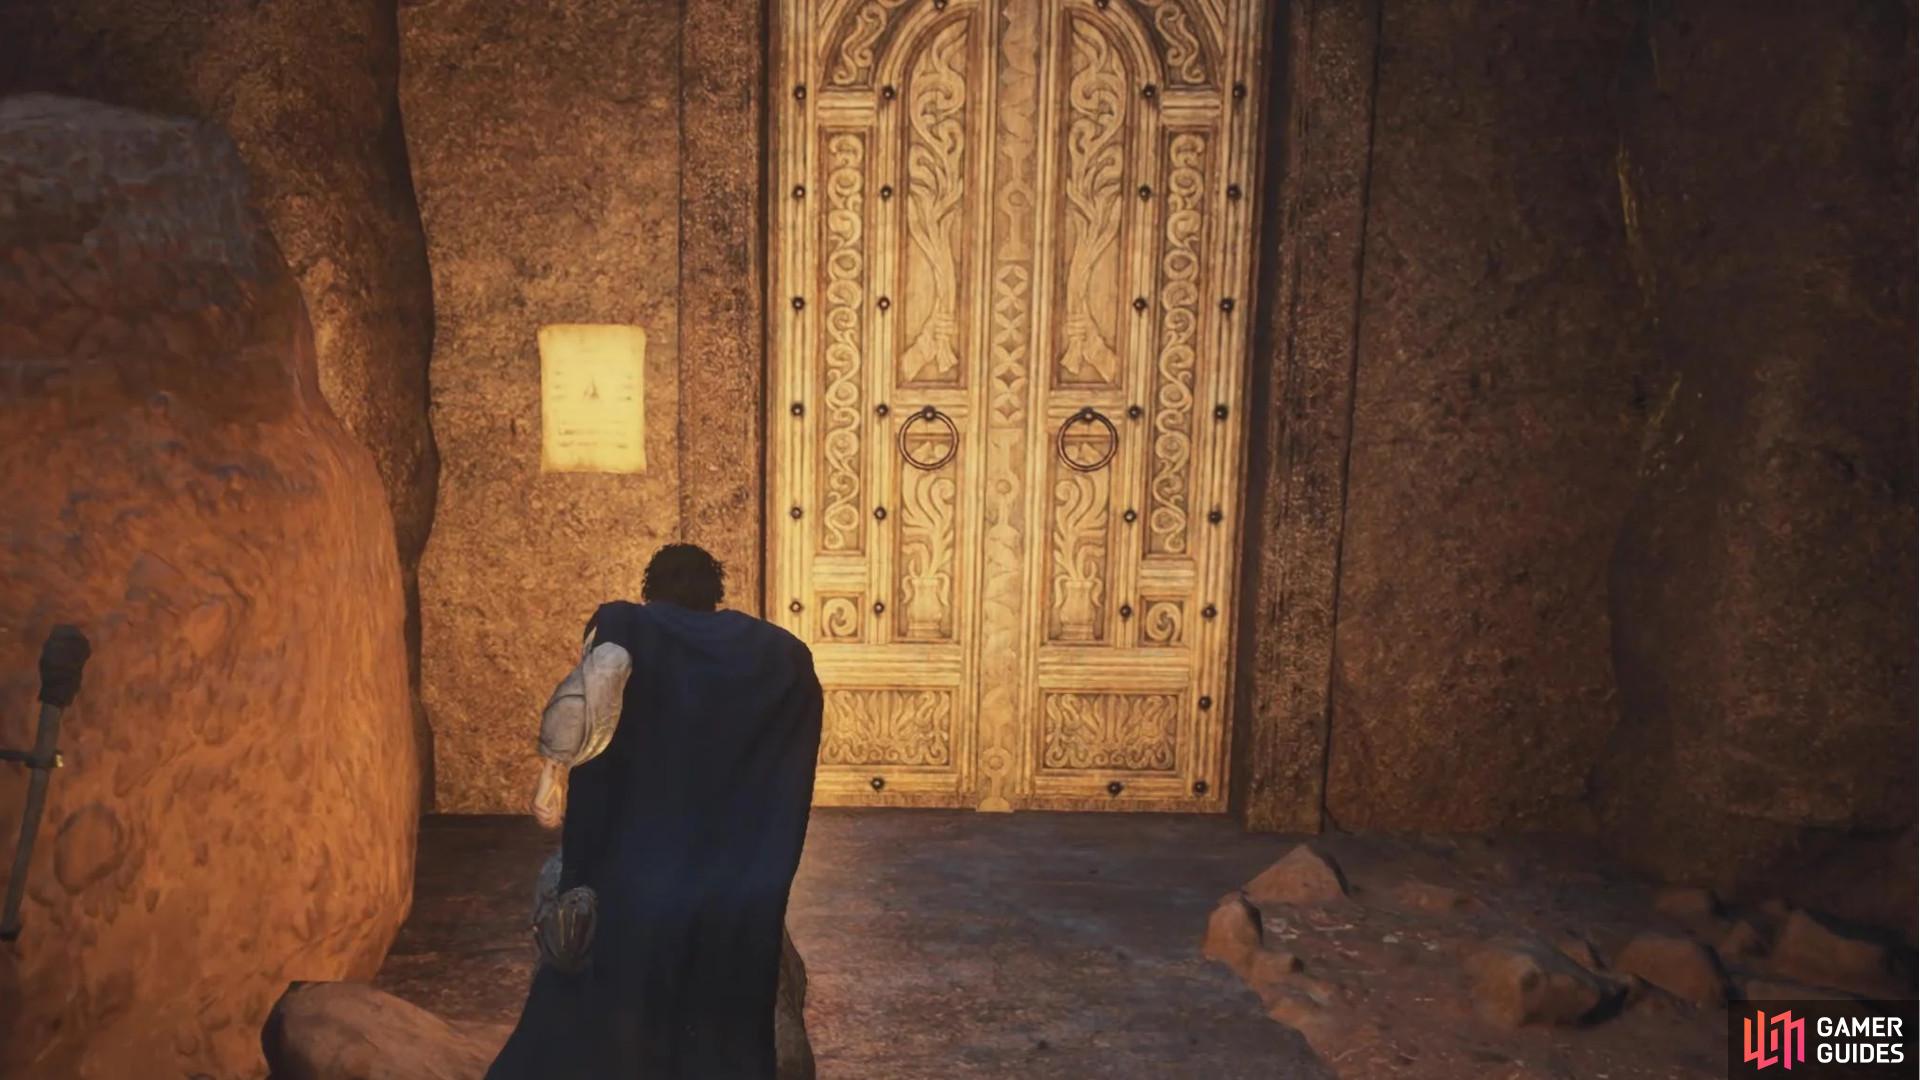 Enter the main city in Battahl and look for the white doors near the Flamebearer Palace to enter the Secret Laboratory where you’ll find the next part of the Letter.